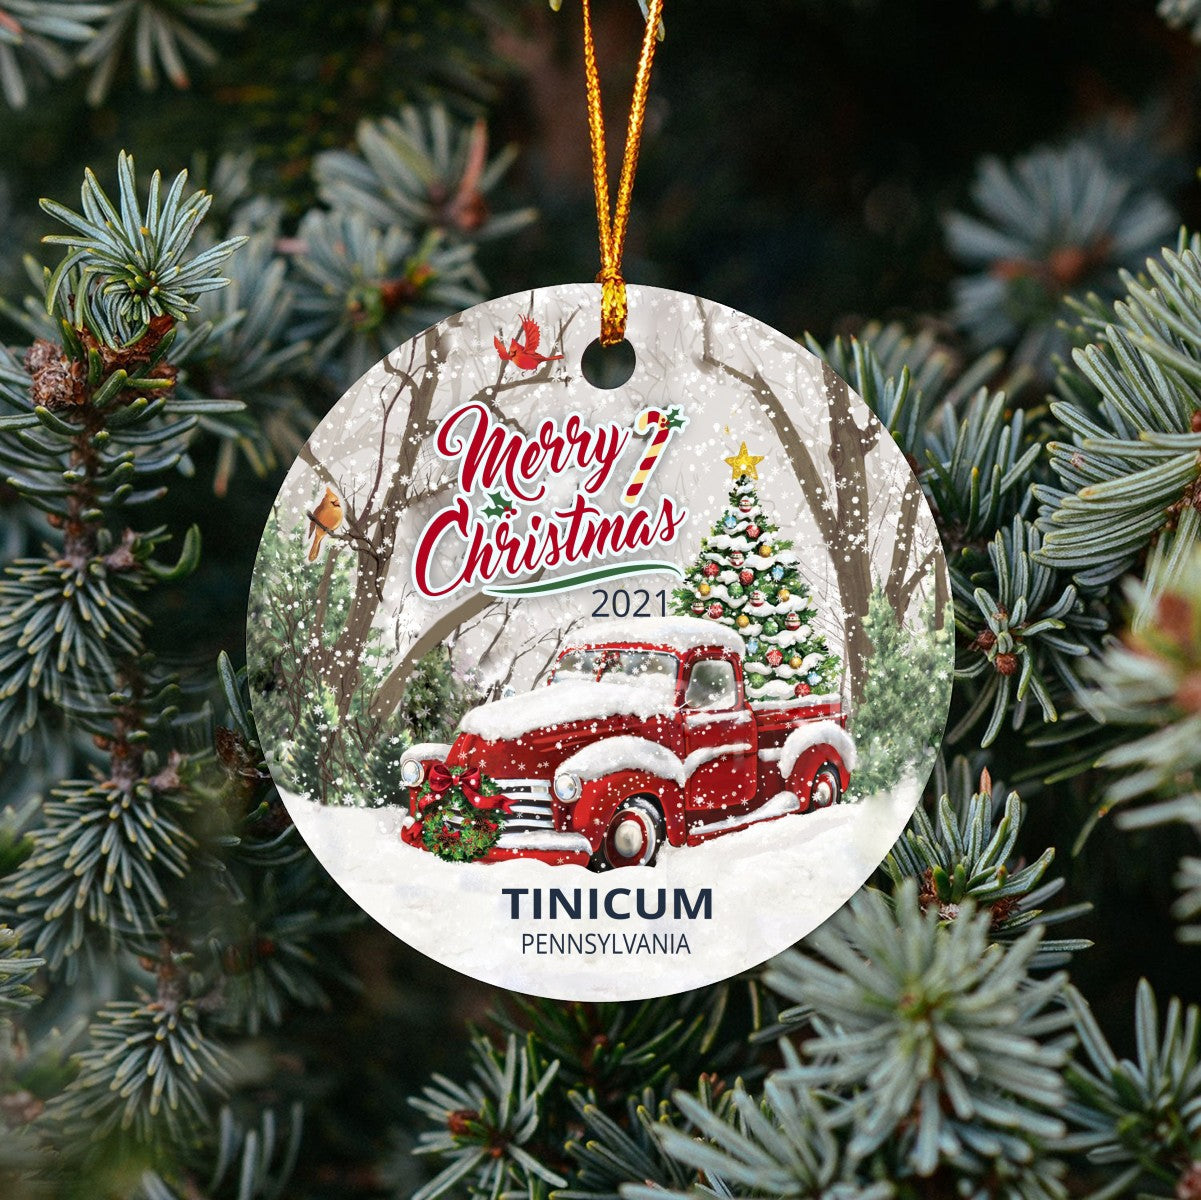 Christmas Tree Ornaments Tinicum - Ornament With Name City, State Tinicum Pennsylvania PA Ornament - Red Truck Xmas Ornaments 3'' Plastic Gift For Family, Friend And Housewarming